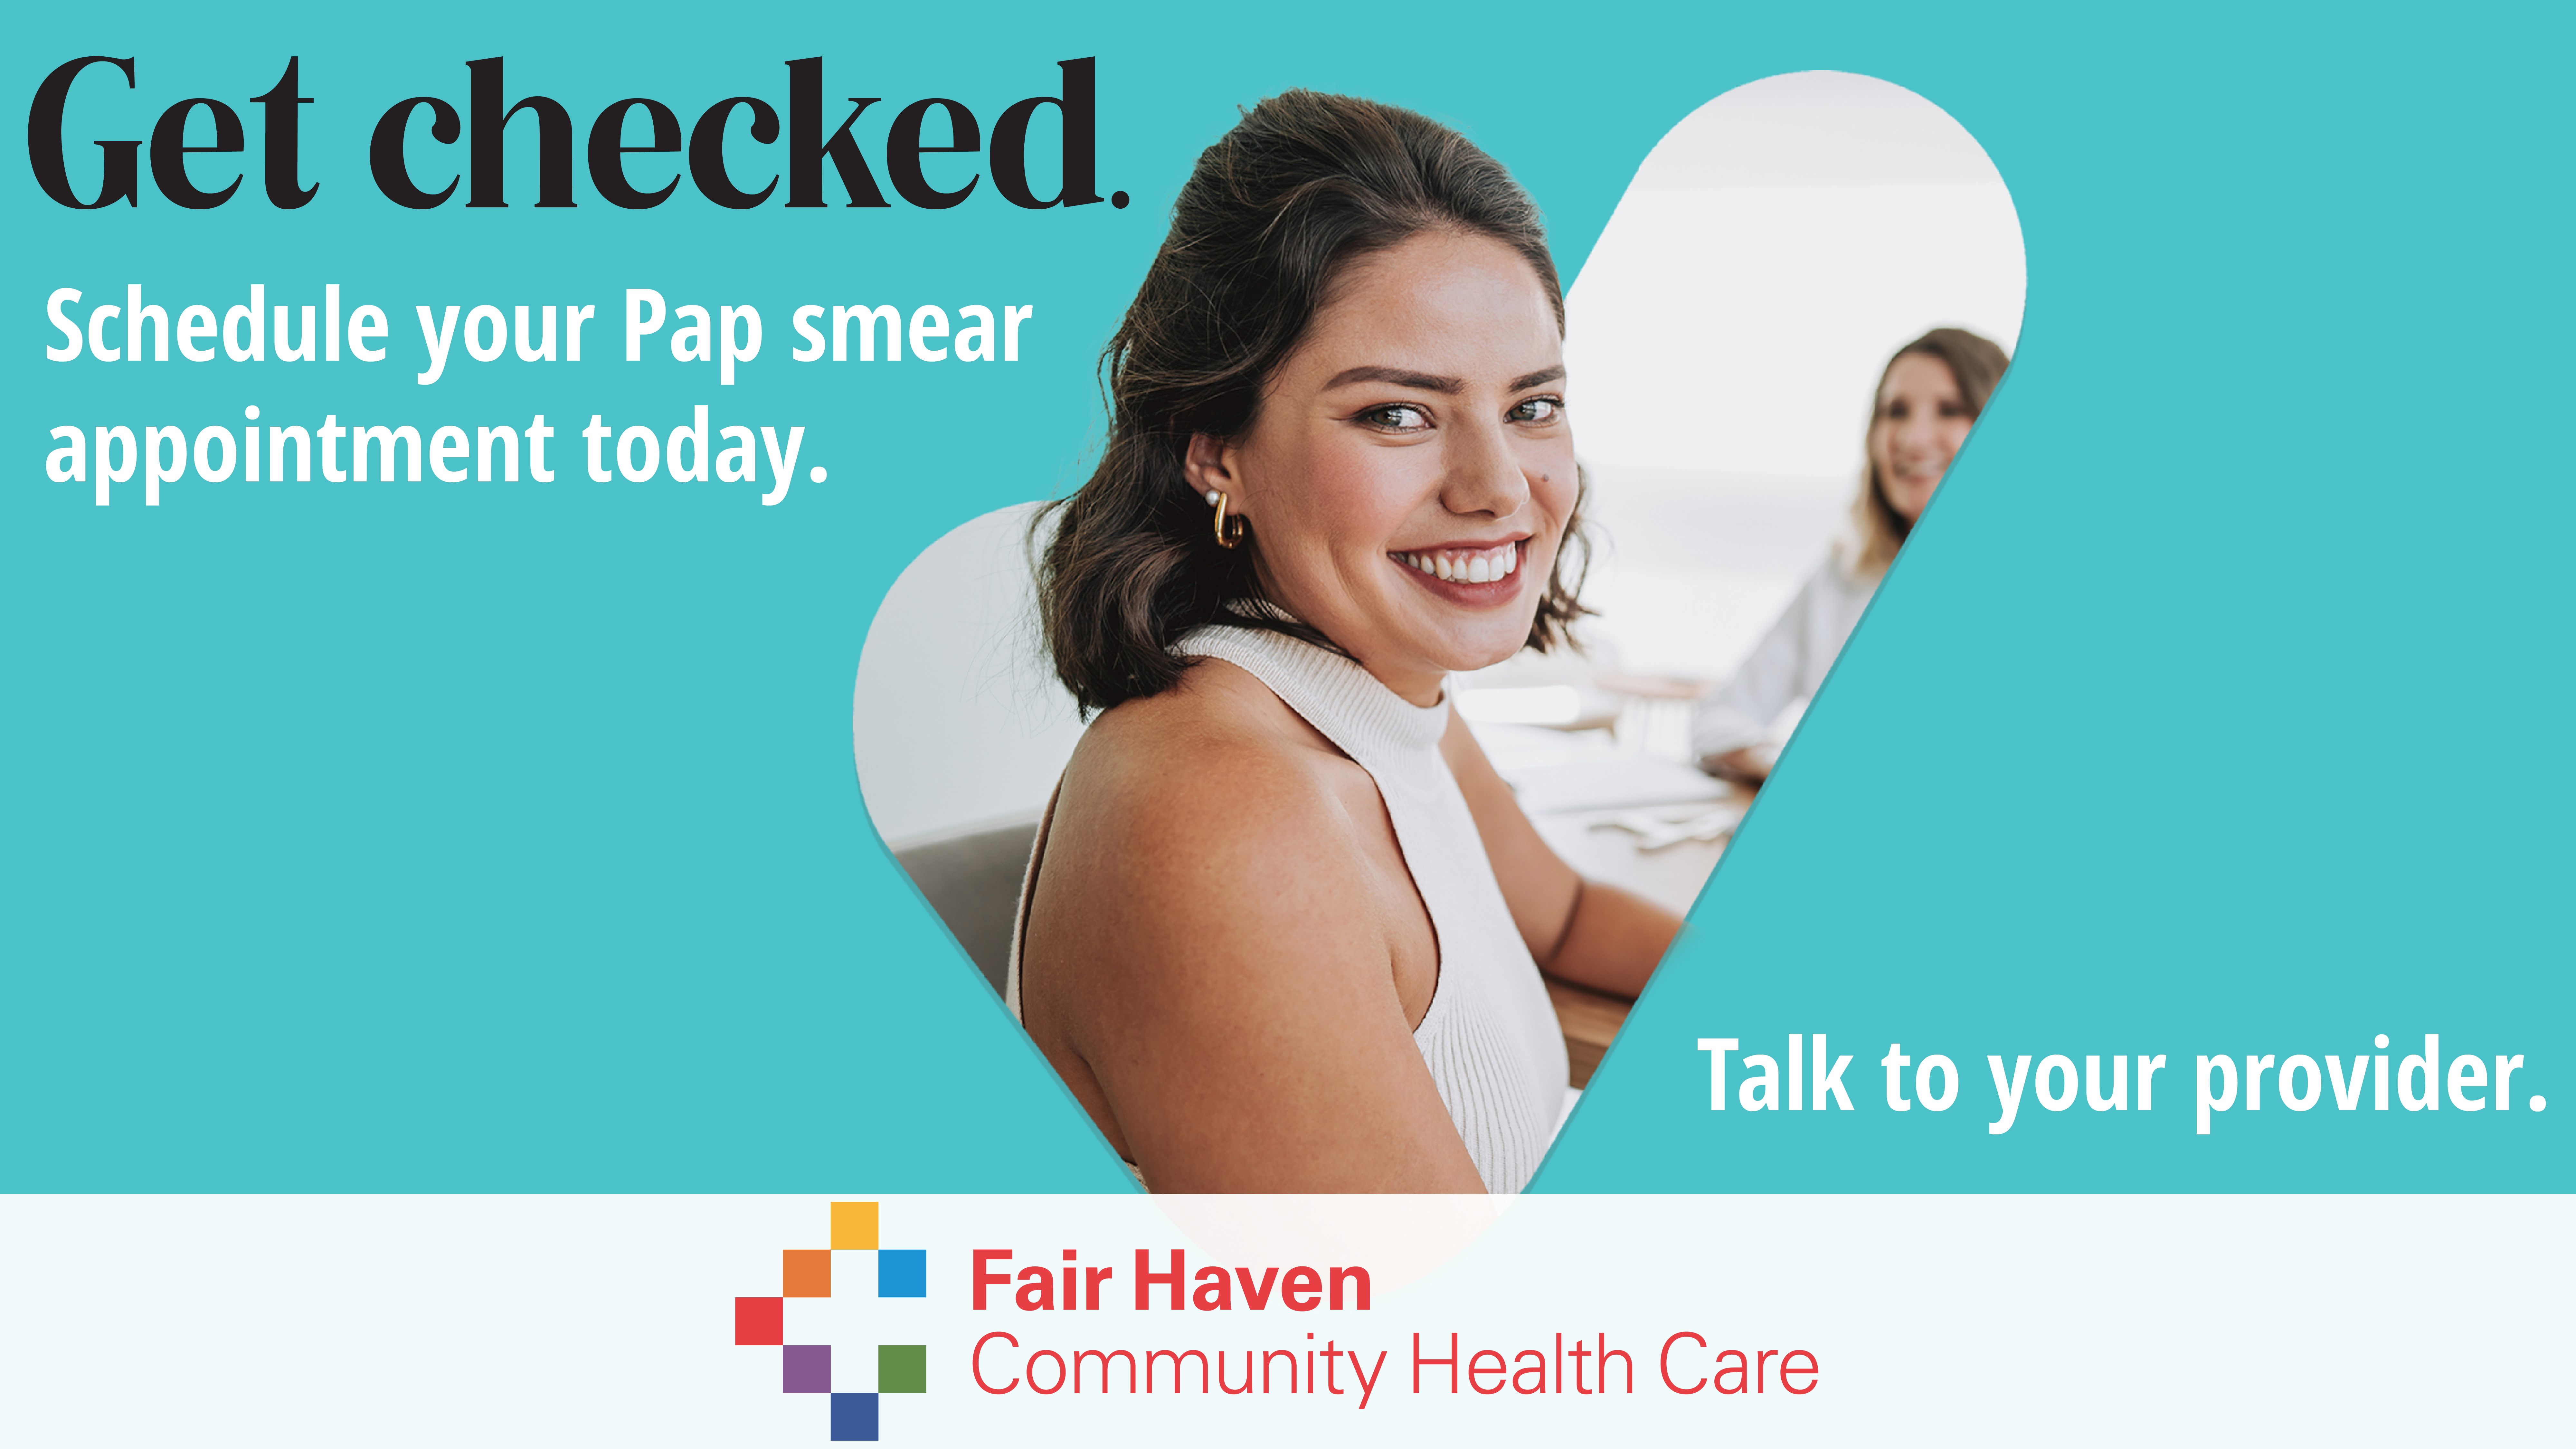 Schedule your Pap smear today!